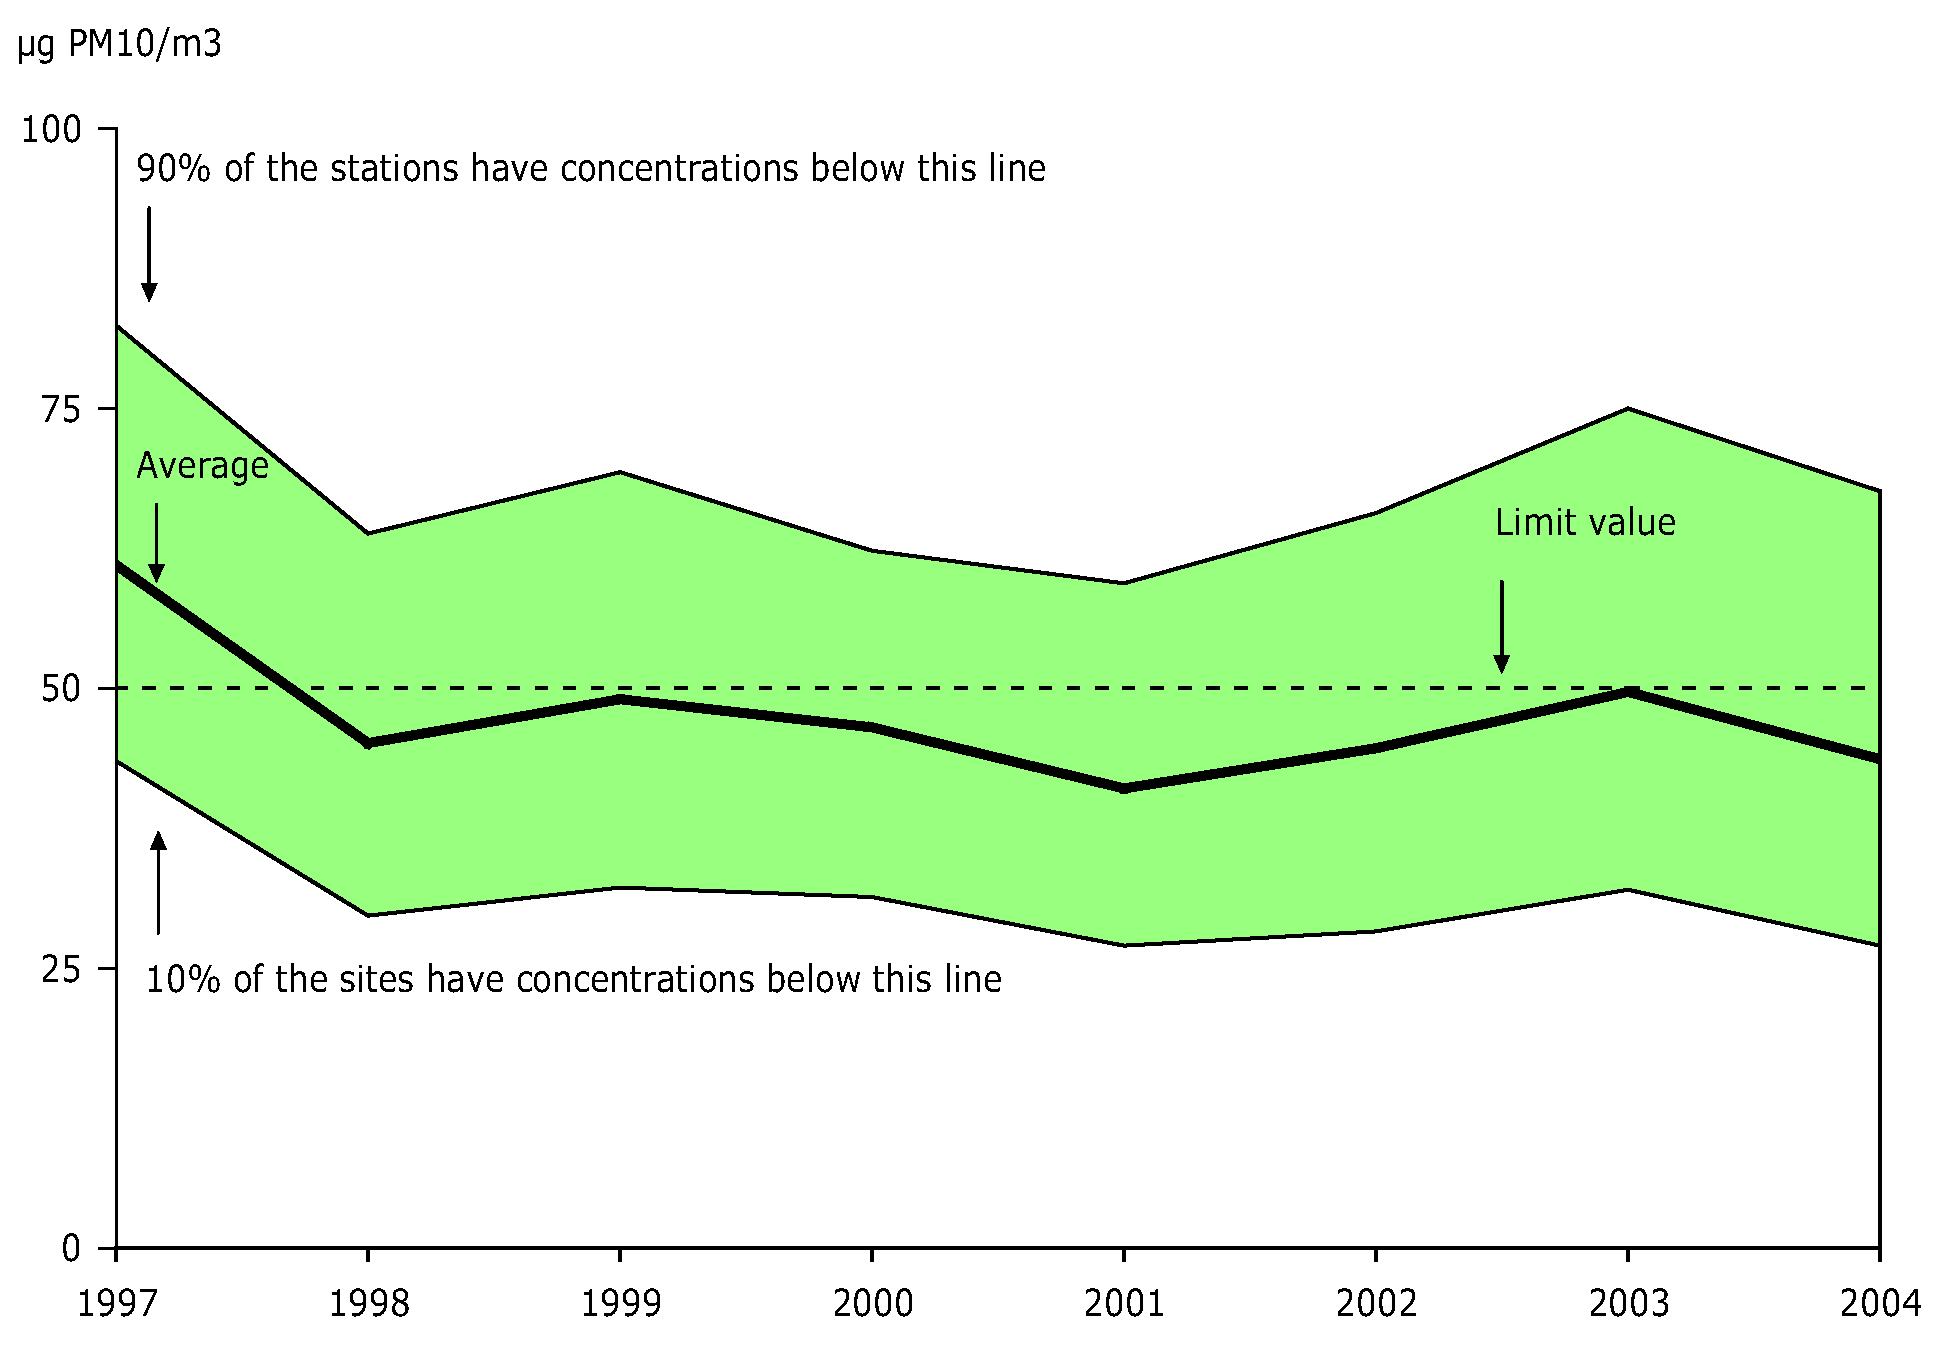 36th highest 24-hour mean PM10 concentration observed at urban background stations, EEA member countries, 1997-2004